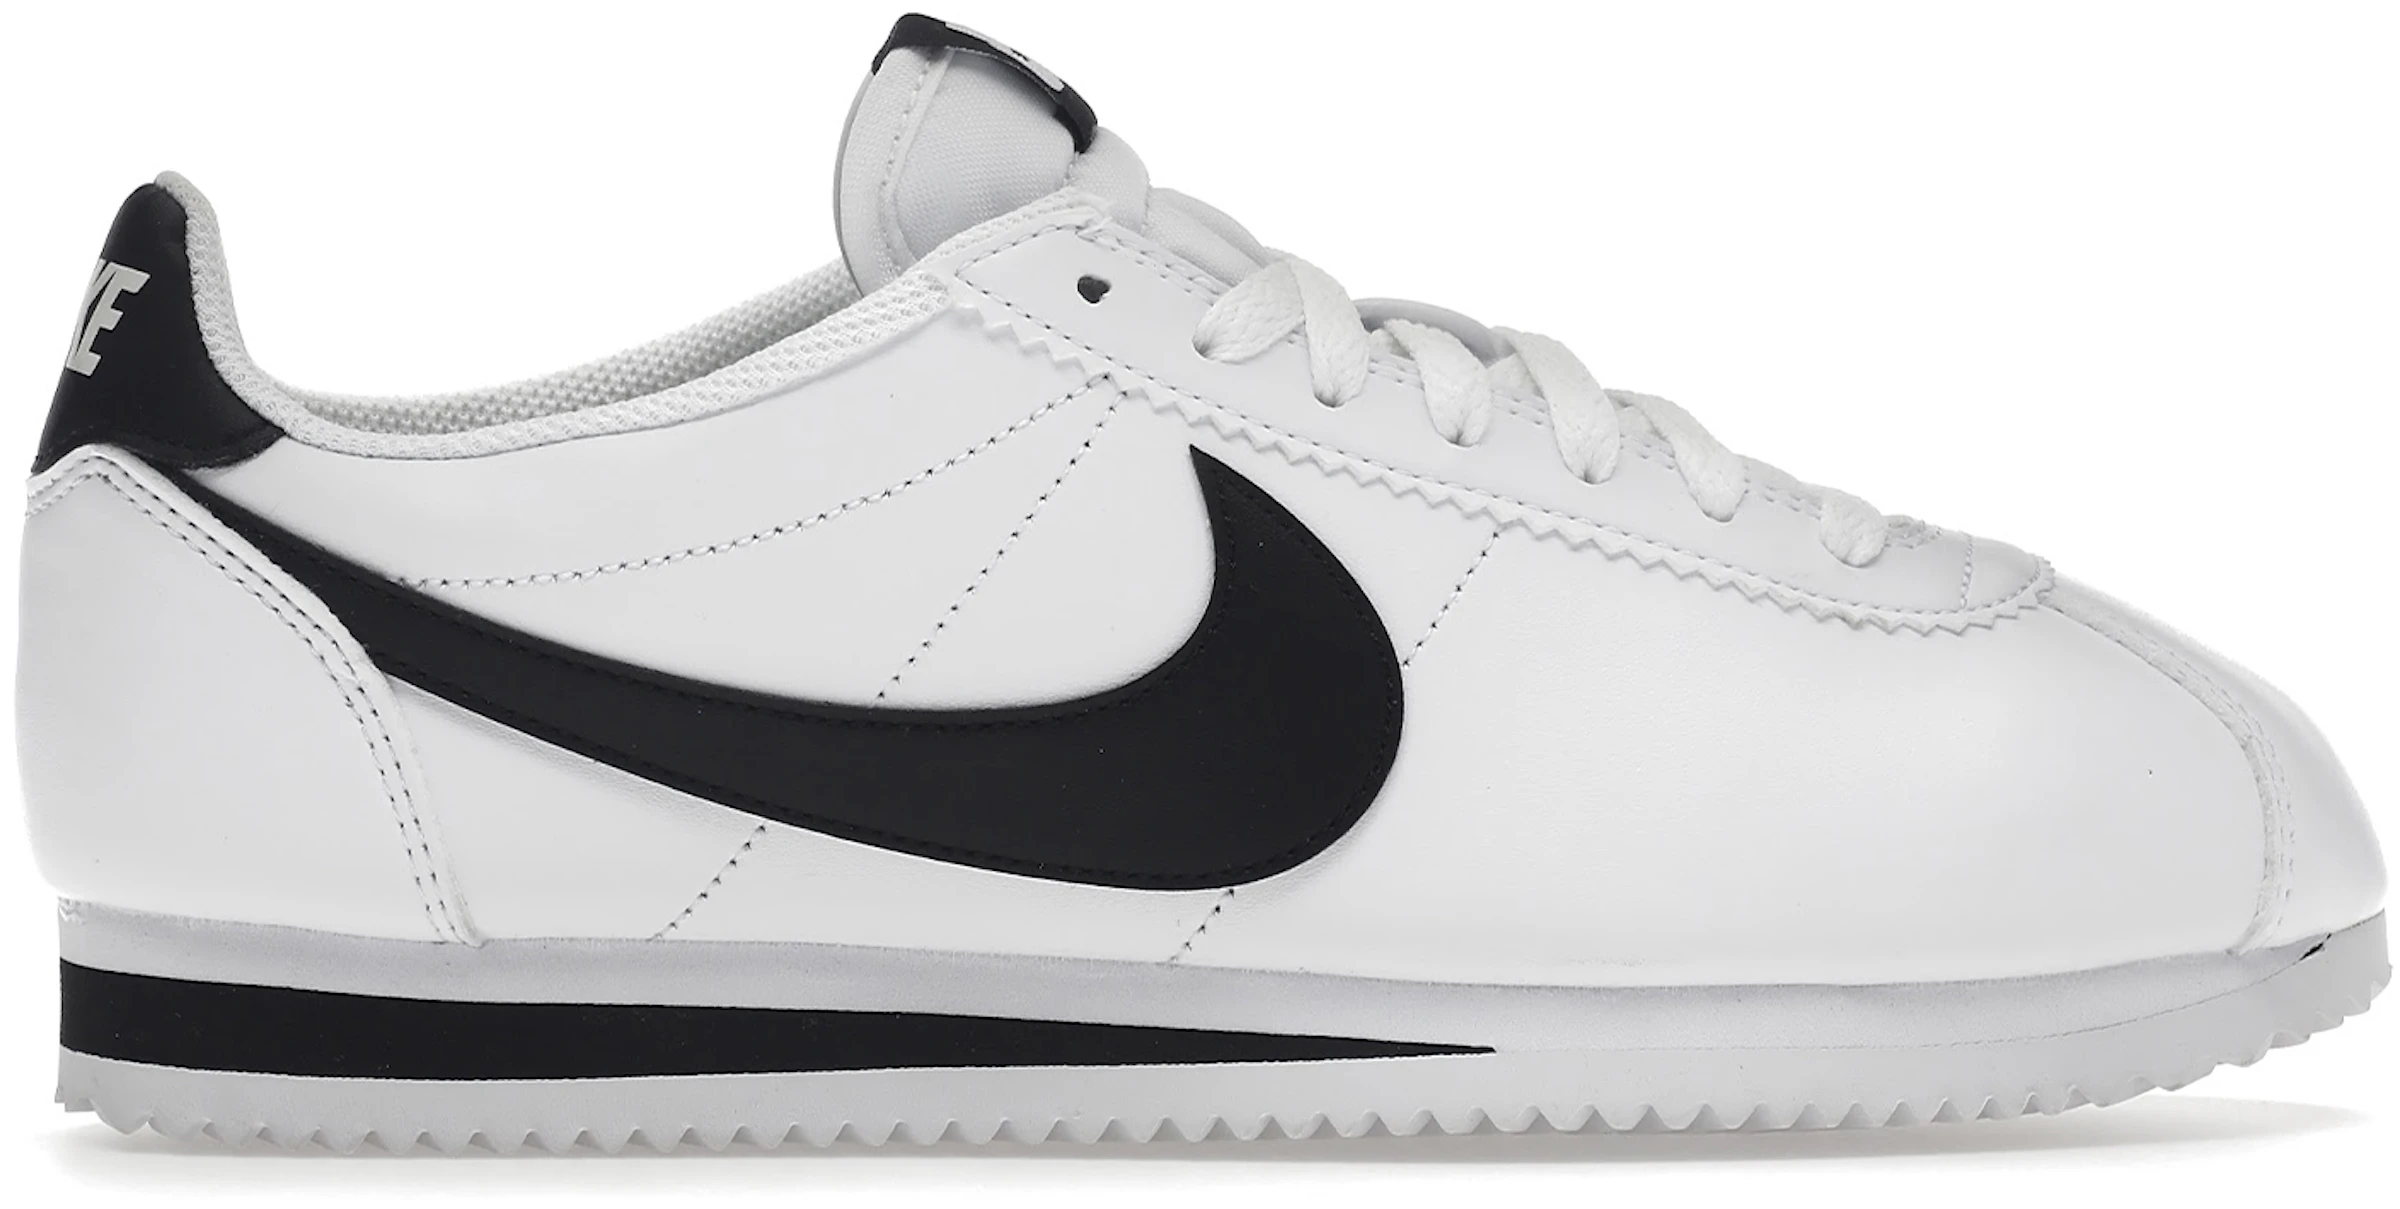 Cortez for Men and Women StockX